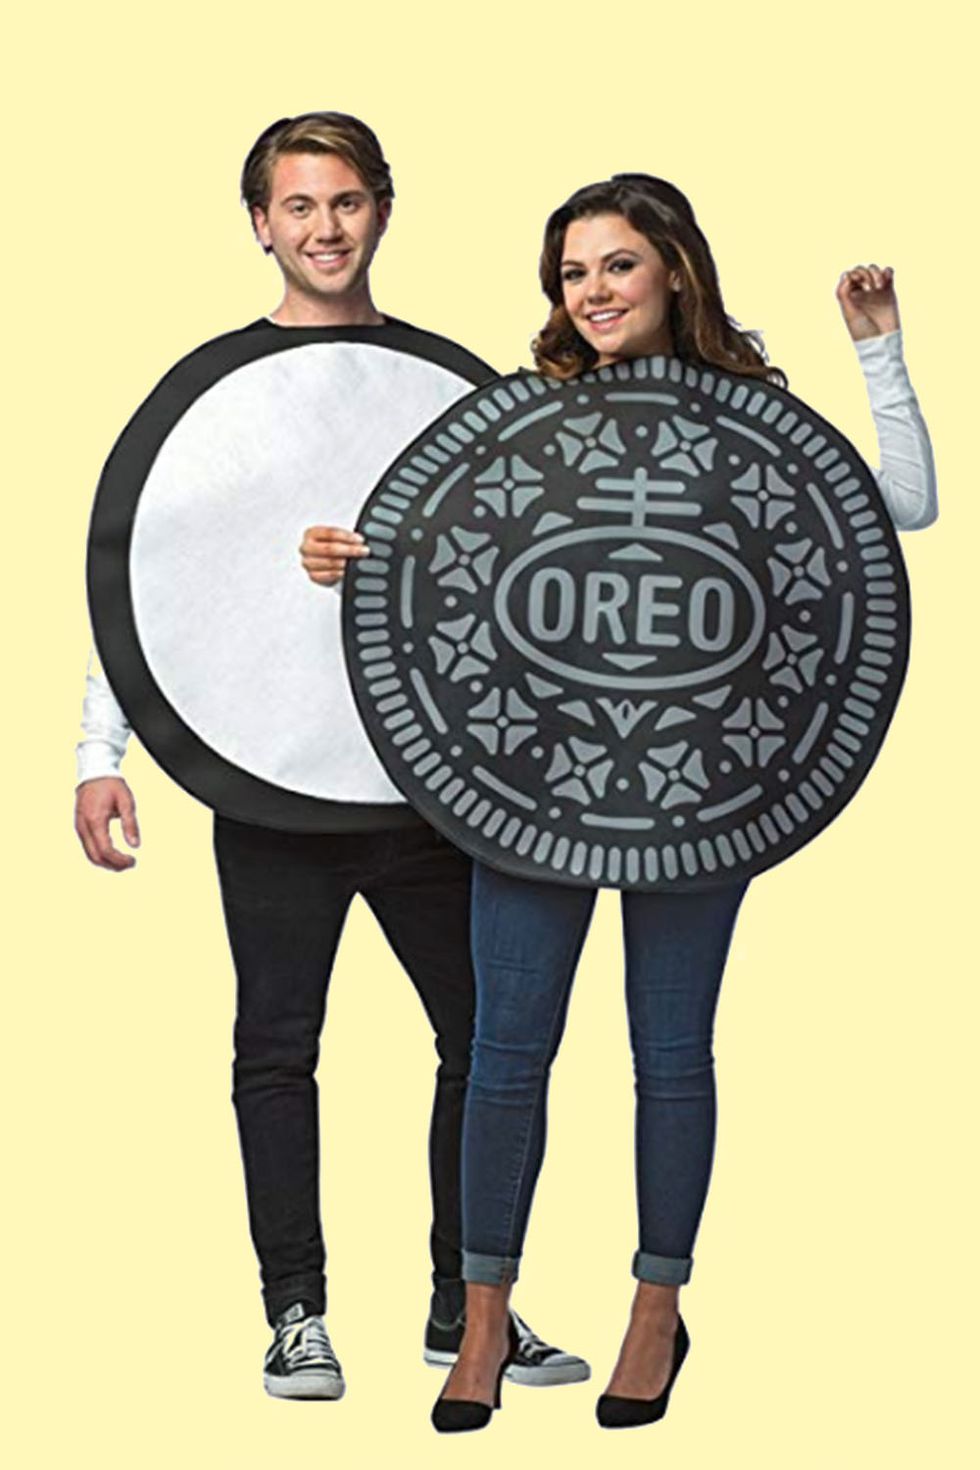 Halloween Costumes for Couples